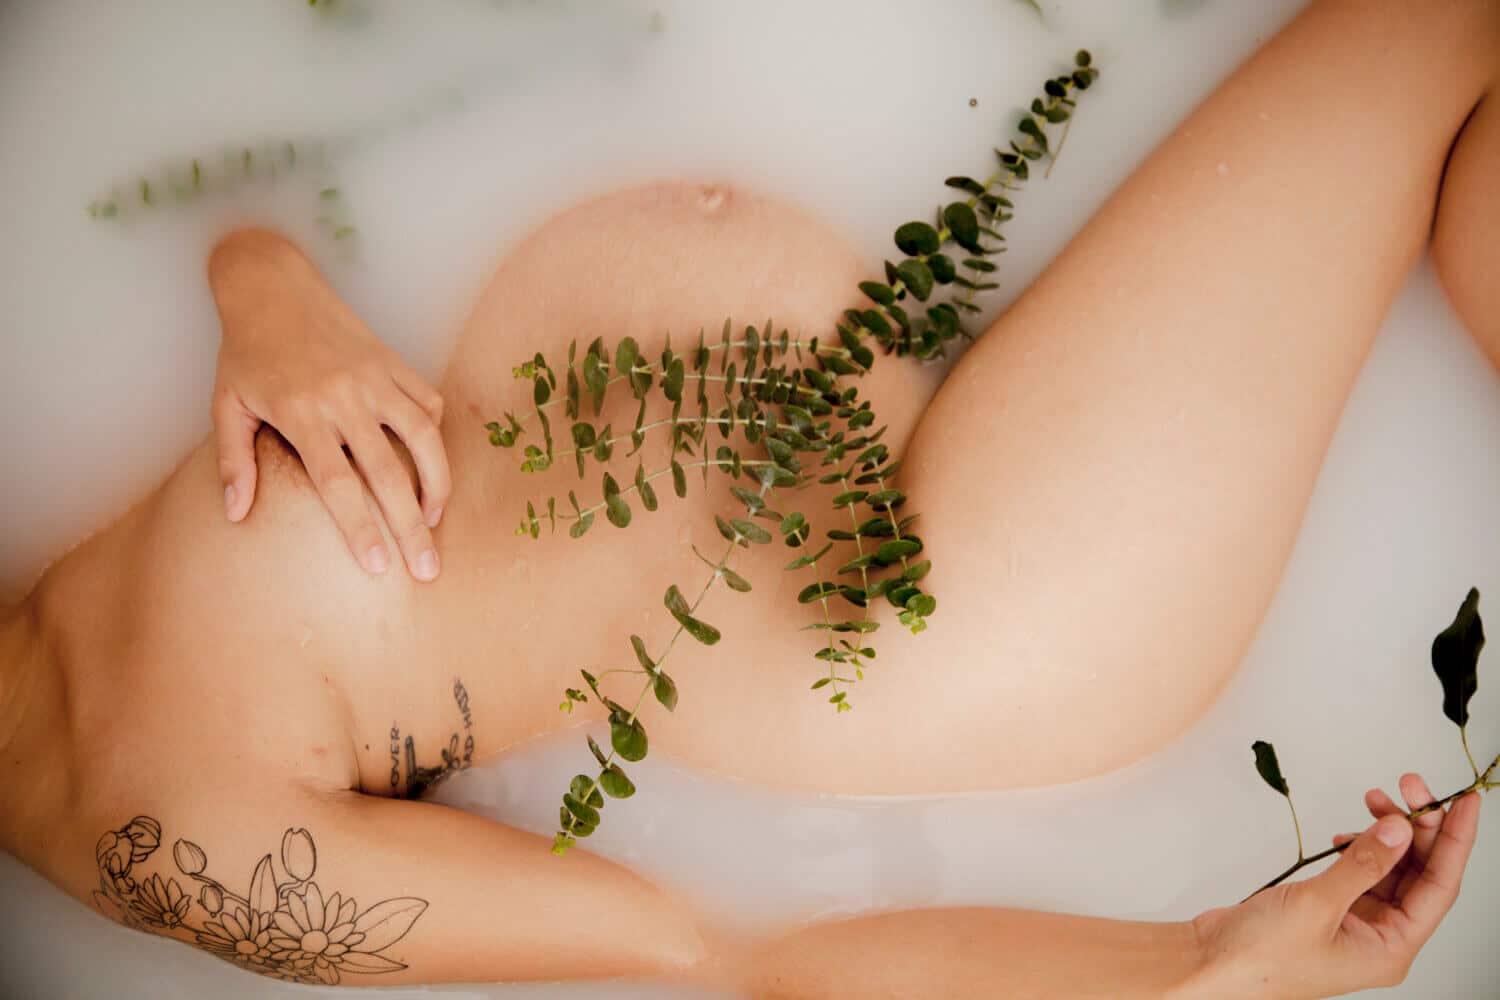 Pregnant woman showing her womb in a bathtub, artistic maternity photography